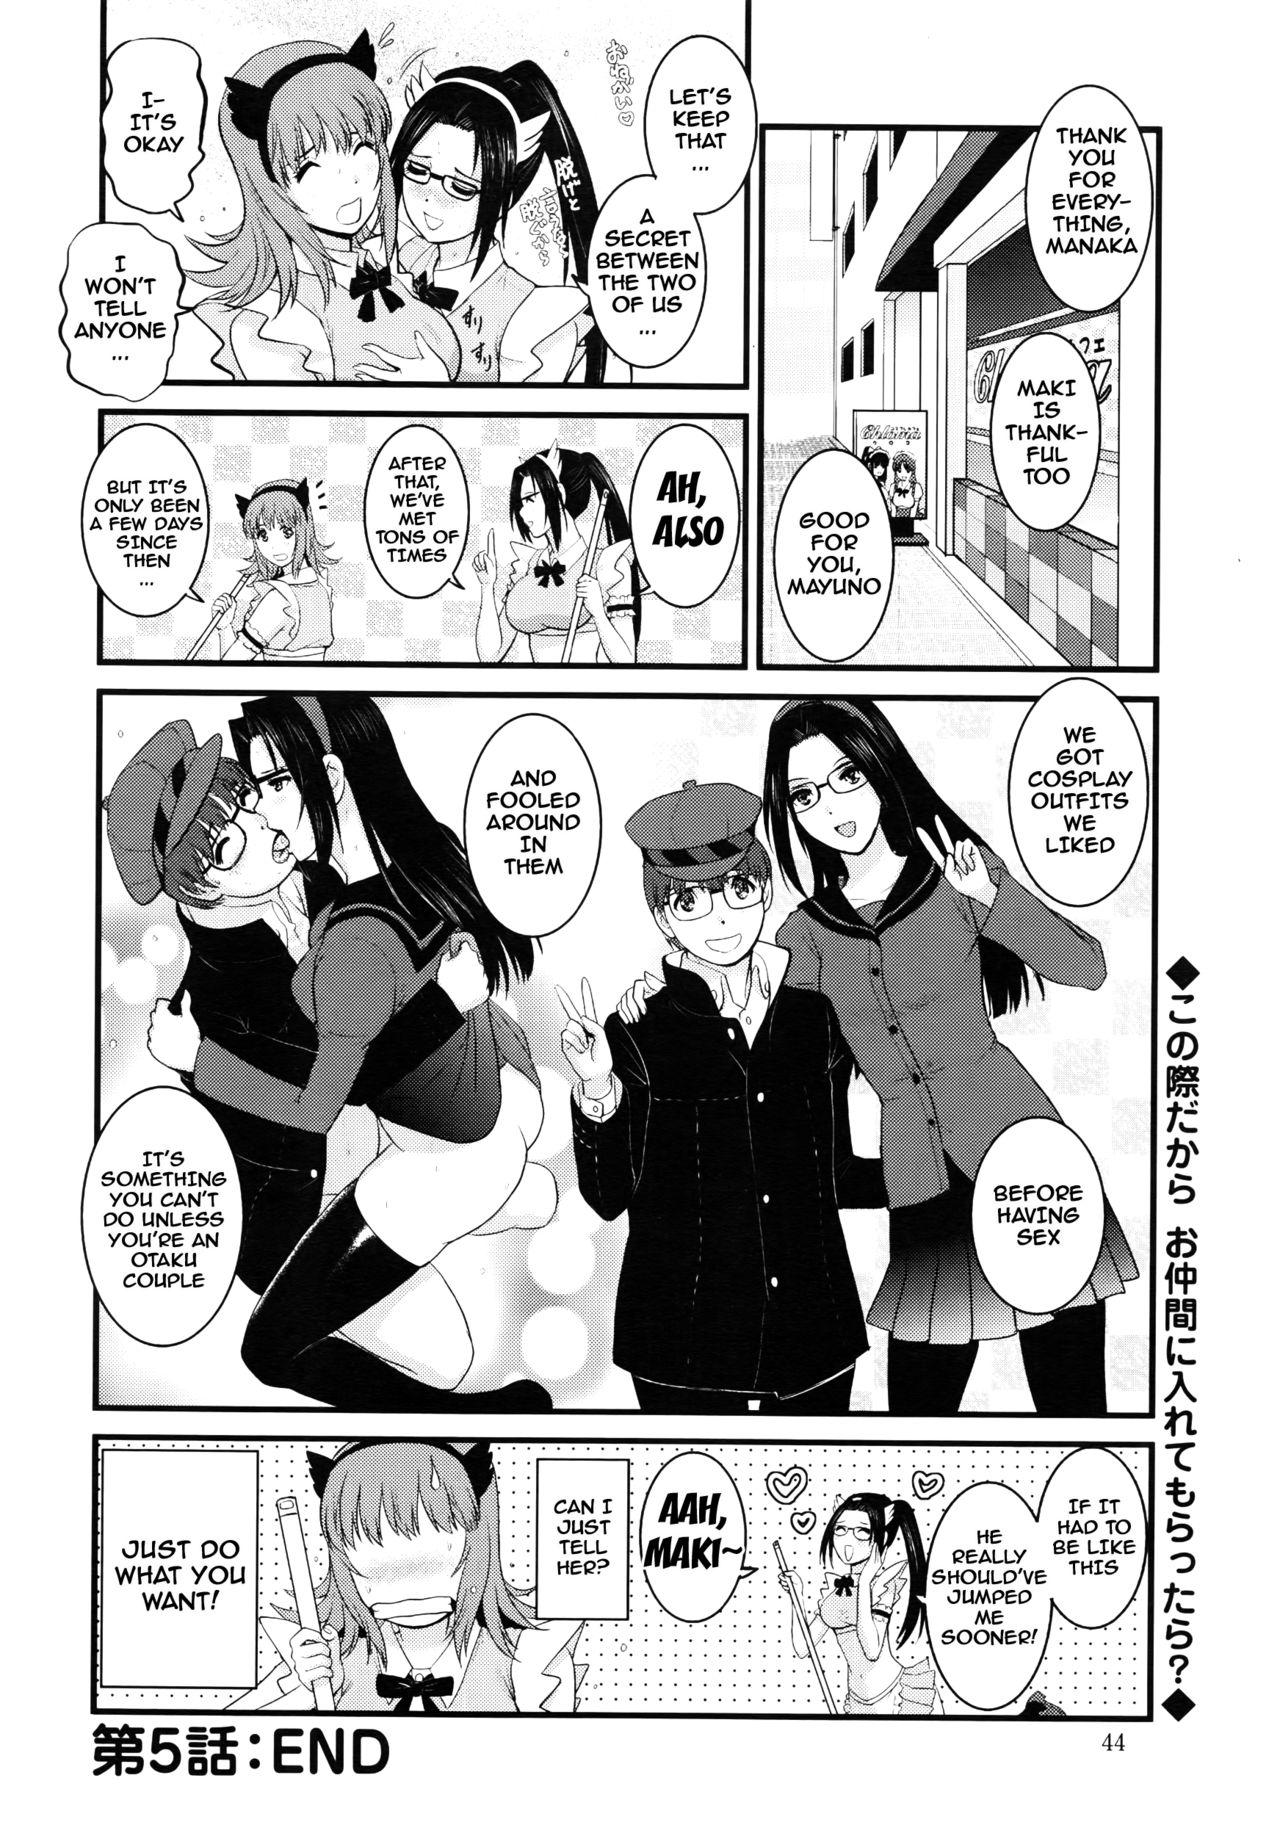 Chunky [Saigado] Part Time Manaka-san 2nd Ch. 1-5 [English] {doujins.com} [Incomplete] Private - Page 99